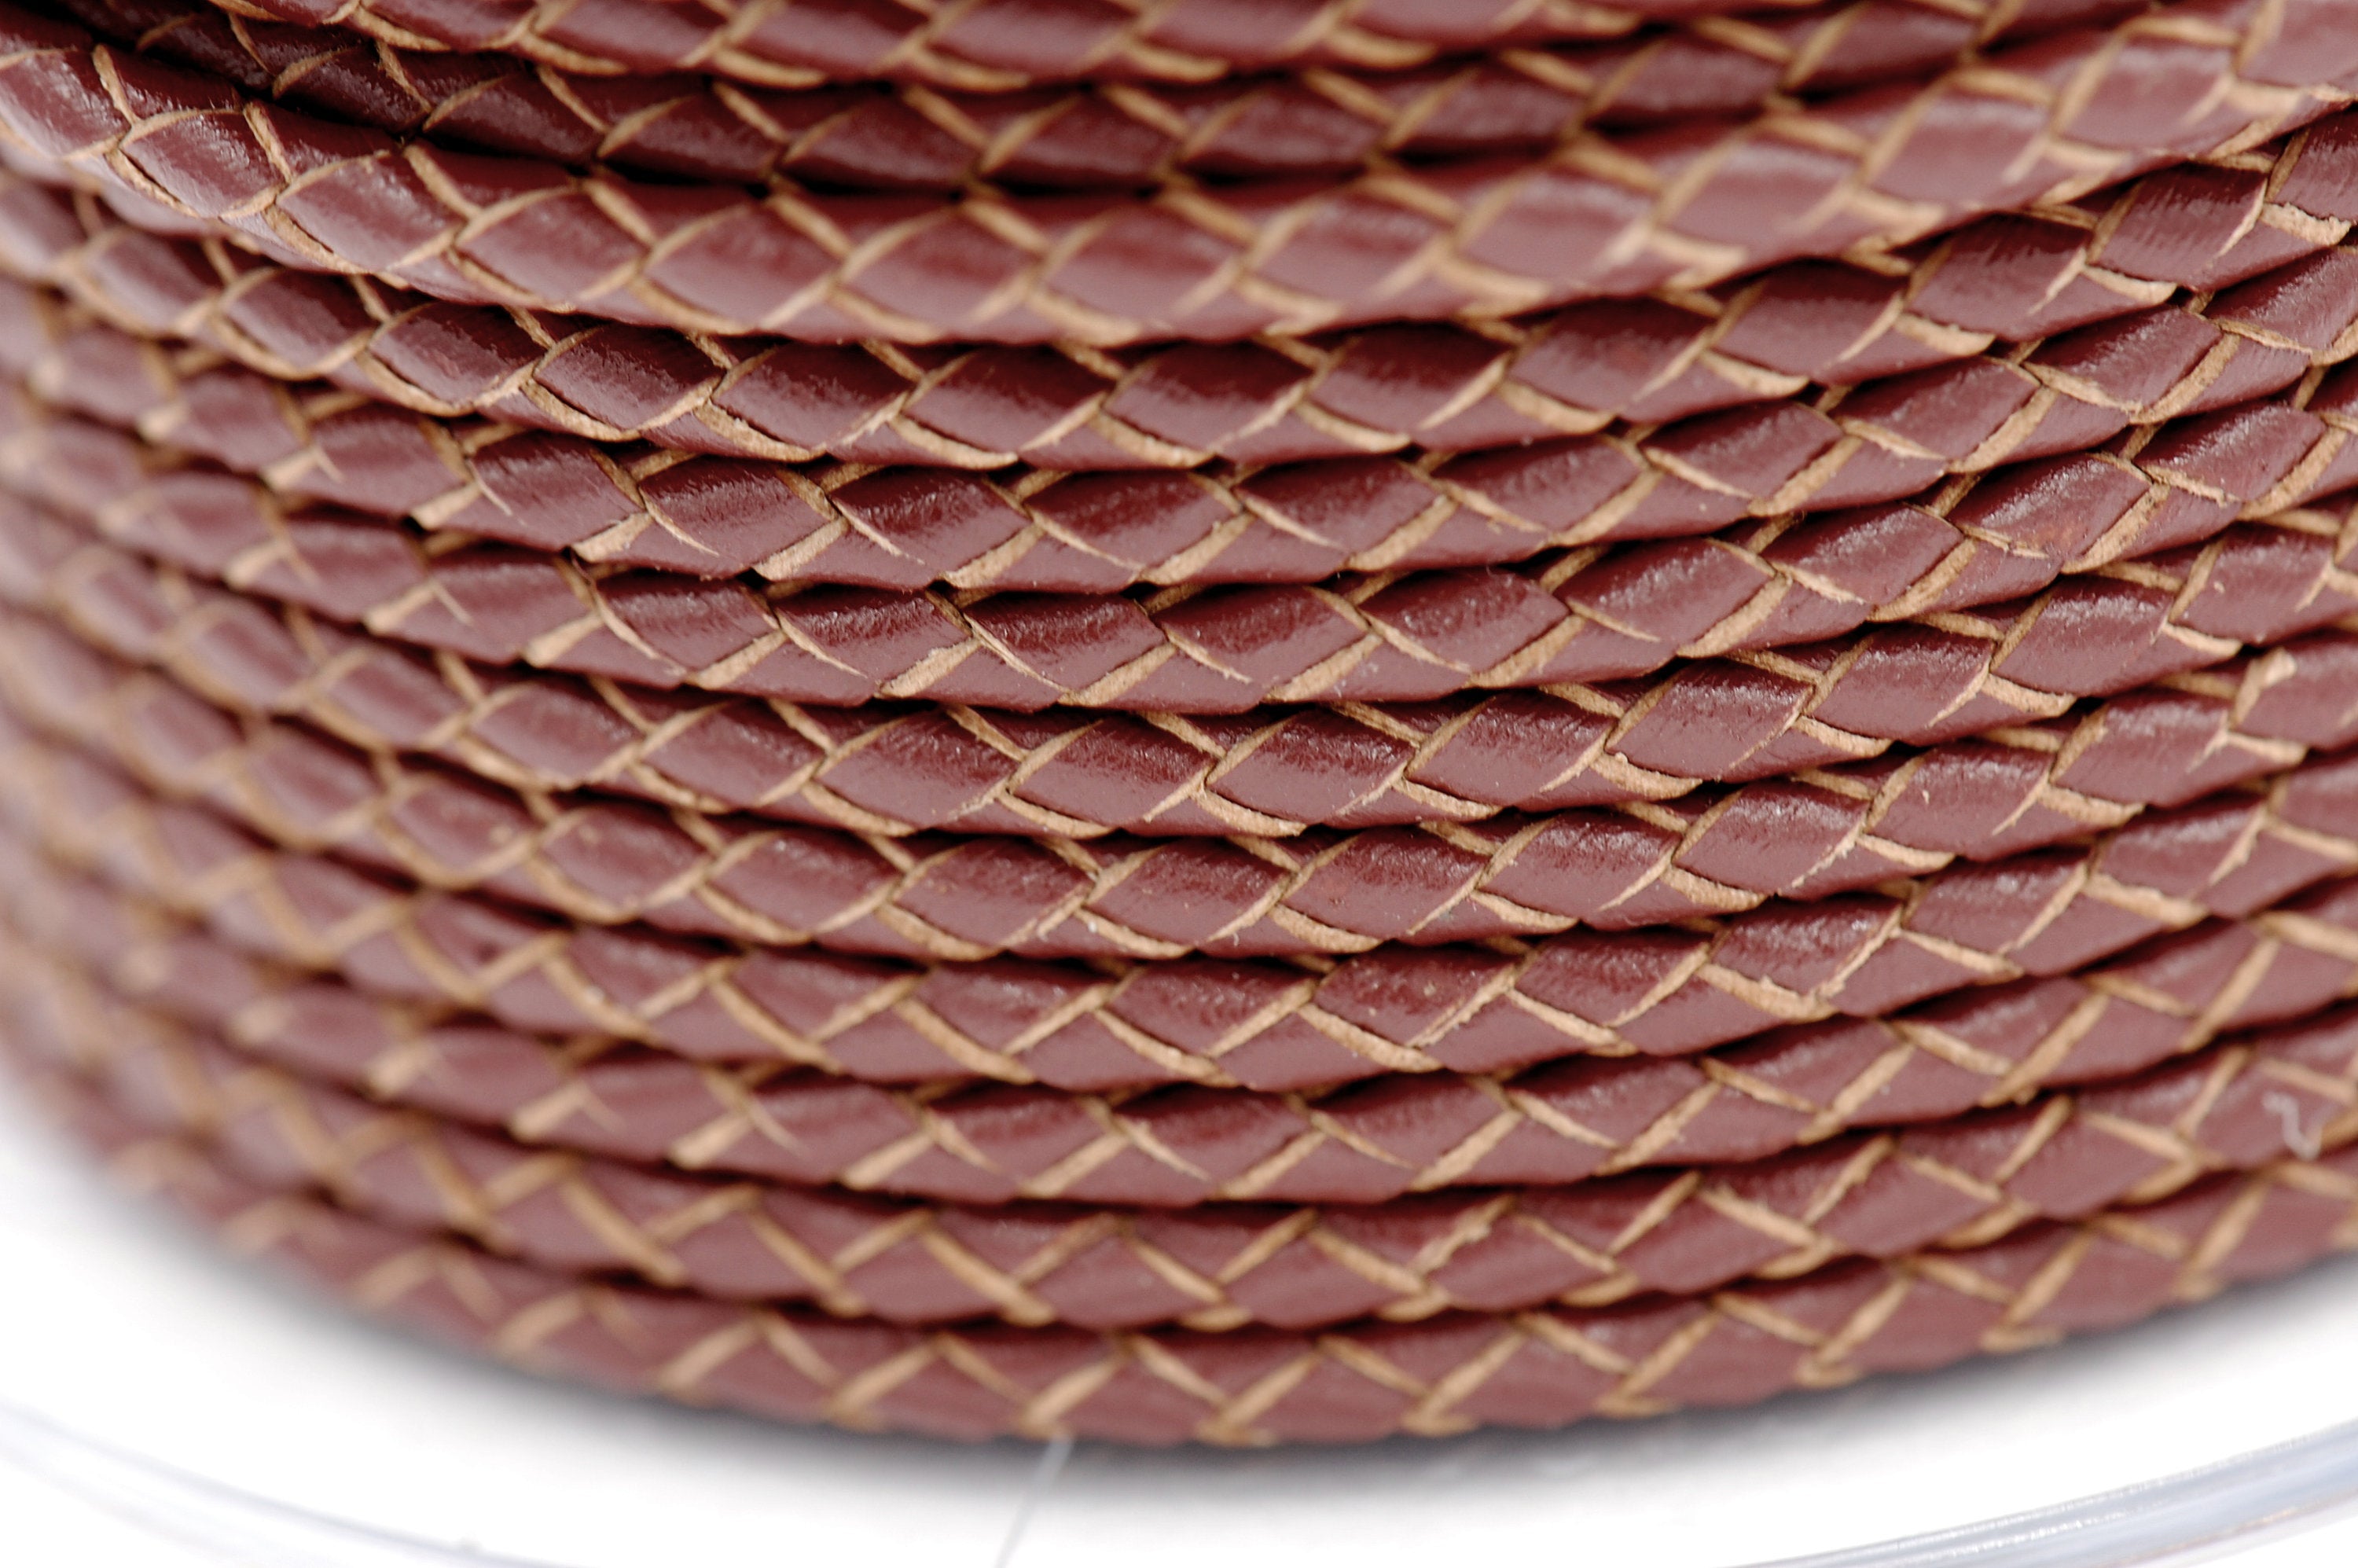 Saddle Brown 3mm Bolo Braided Woven Round Leather Cord 1 Yards / 3 Feet / .9144 Meters